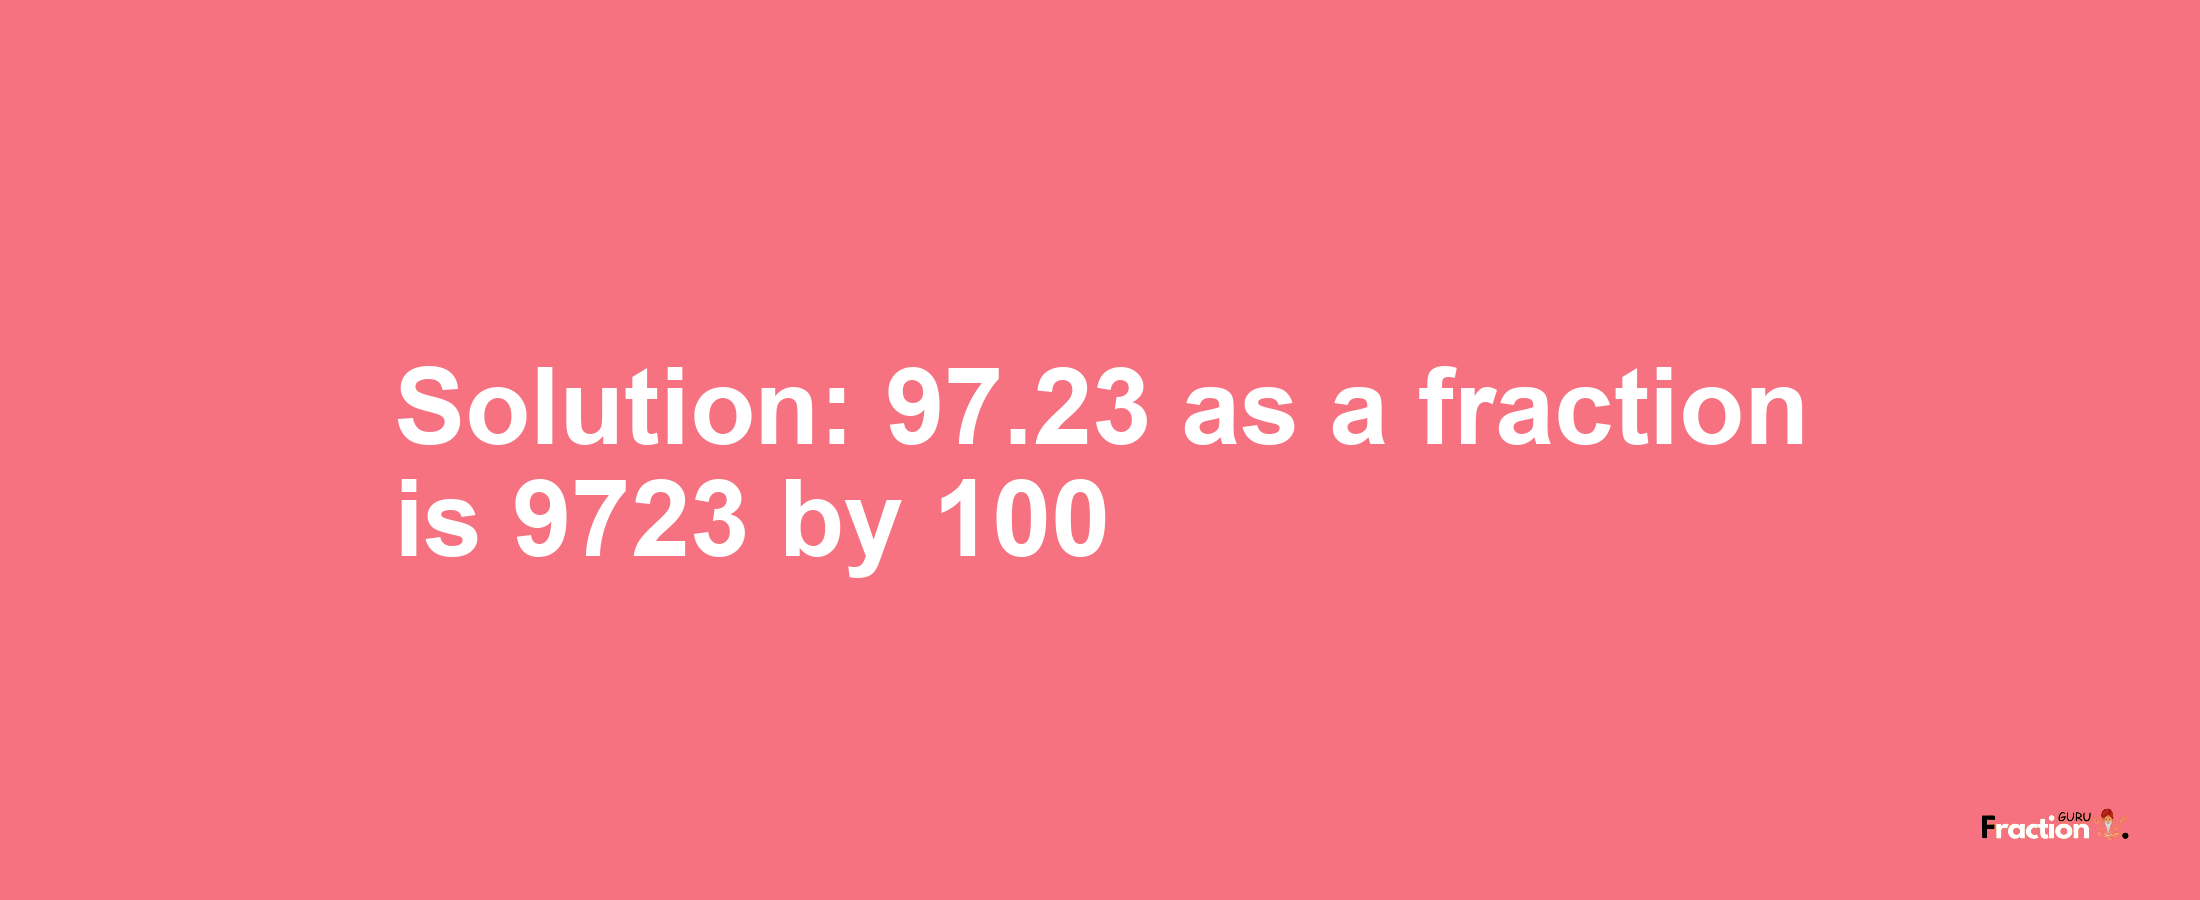 Solution:97.23 as a fraction is 9723/100